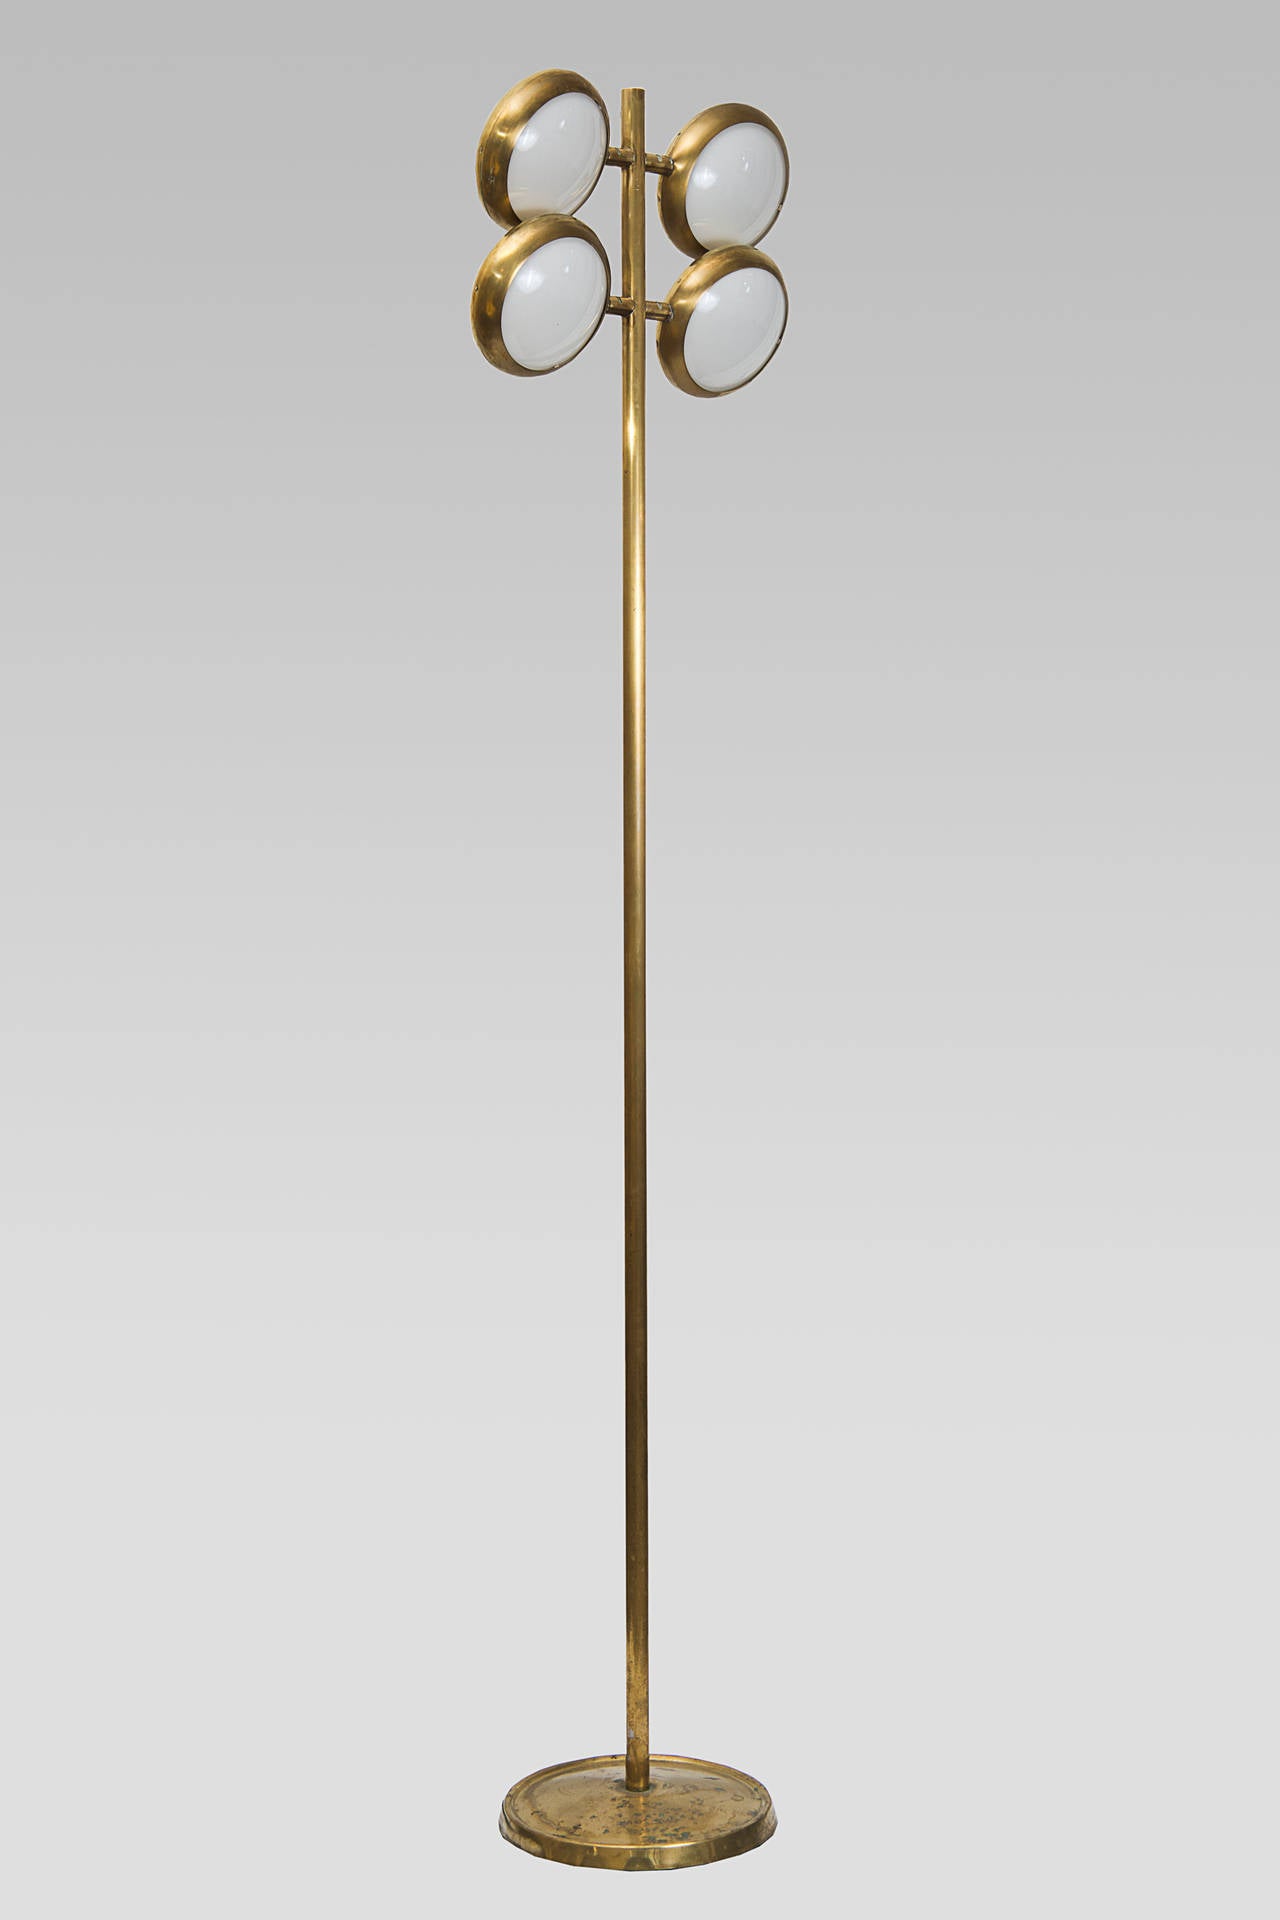 Floor lamp by Fontana Arte, mod. no. 2380.
from the Fontana Arte Archive (see the picture 4).
